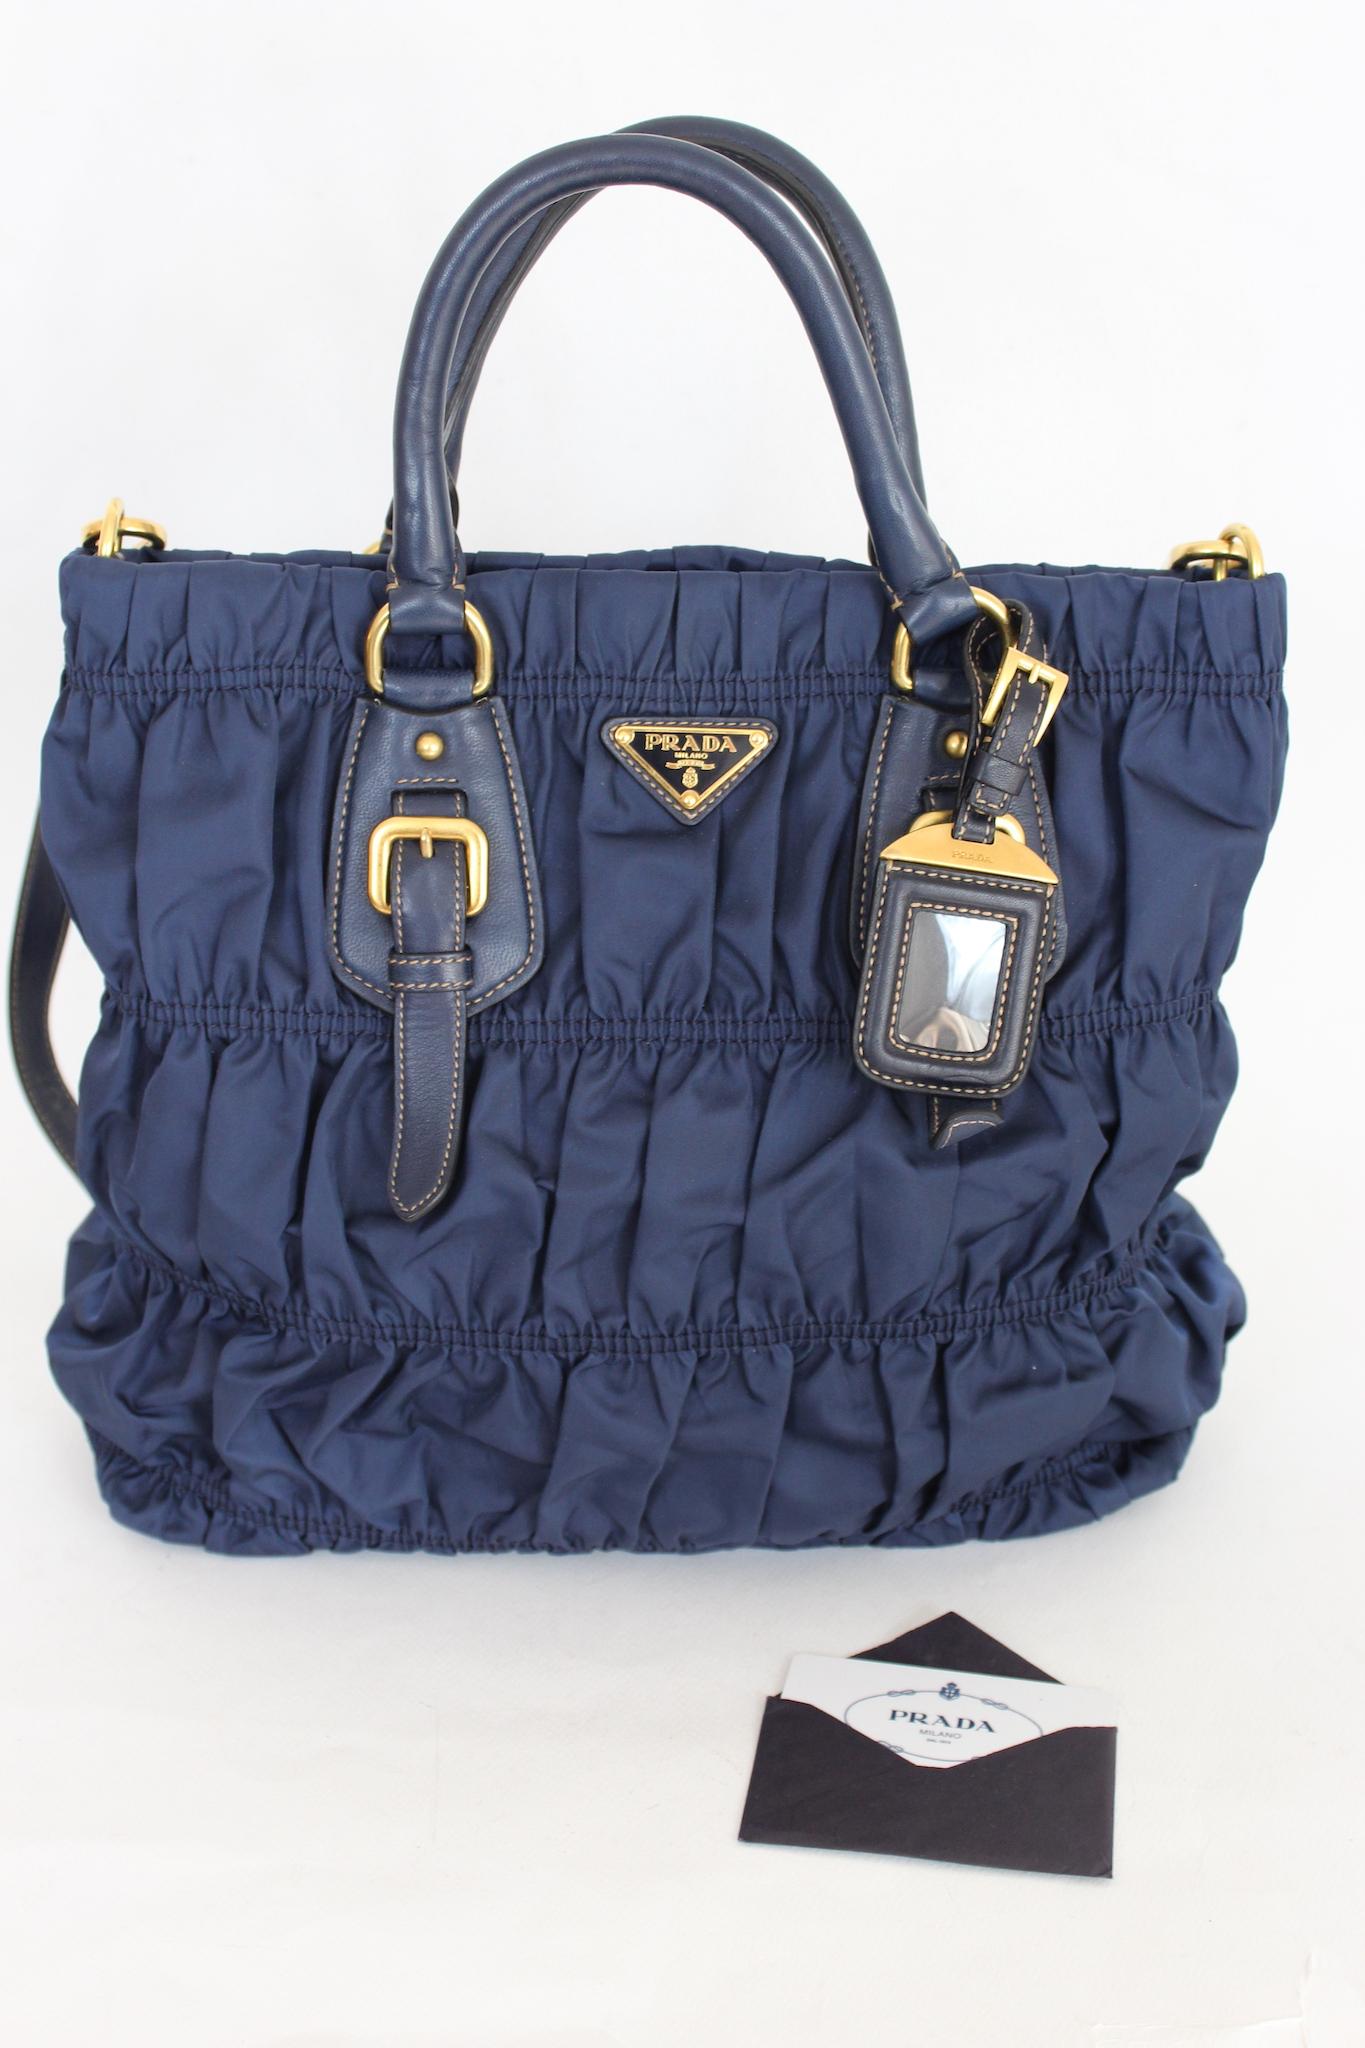 Prada Gaufre bag in Baltic blue color 2000s. Bag made of fine multi-layered pleated nylon fabric with gold-colored details. The bag can be carried by hand using the leather handles or over the shoulder, the latter being adjustable. Clip button